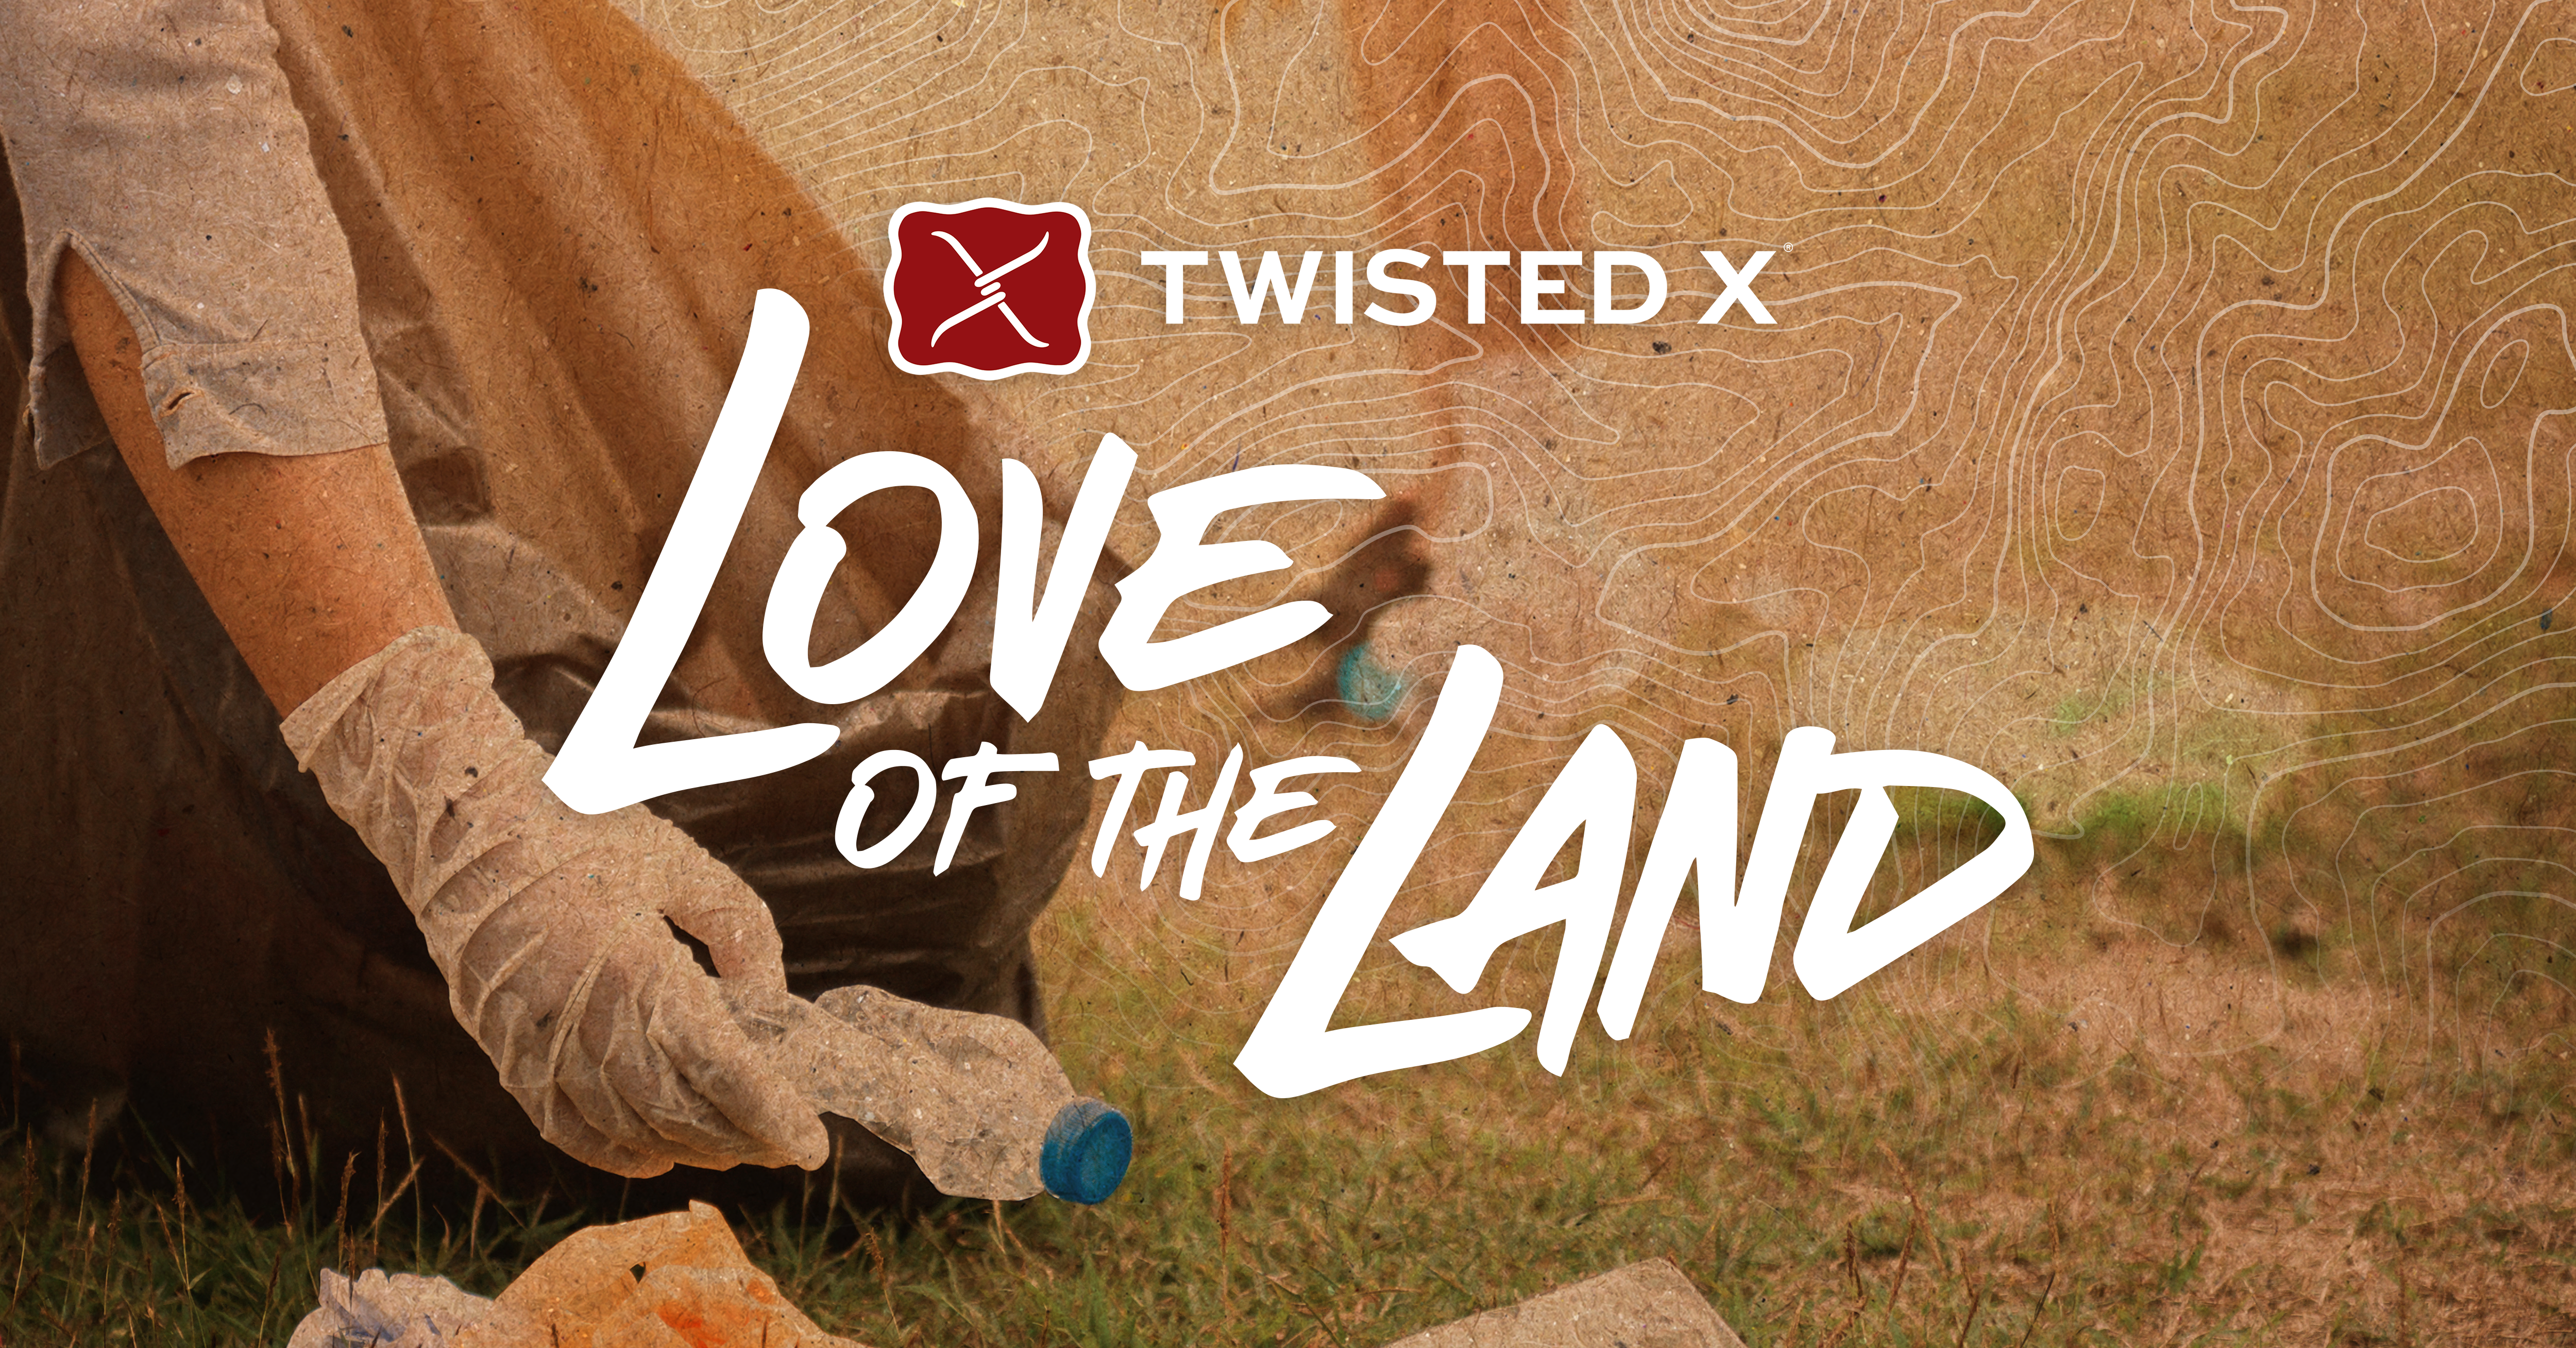 Twisted X® Celebrates Earth Day with Expanded ‘Love of the Land’ Clean-Up Campaign